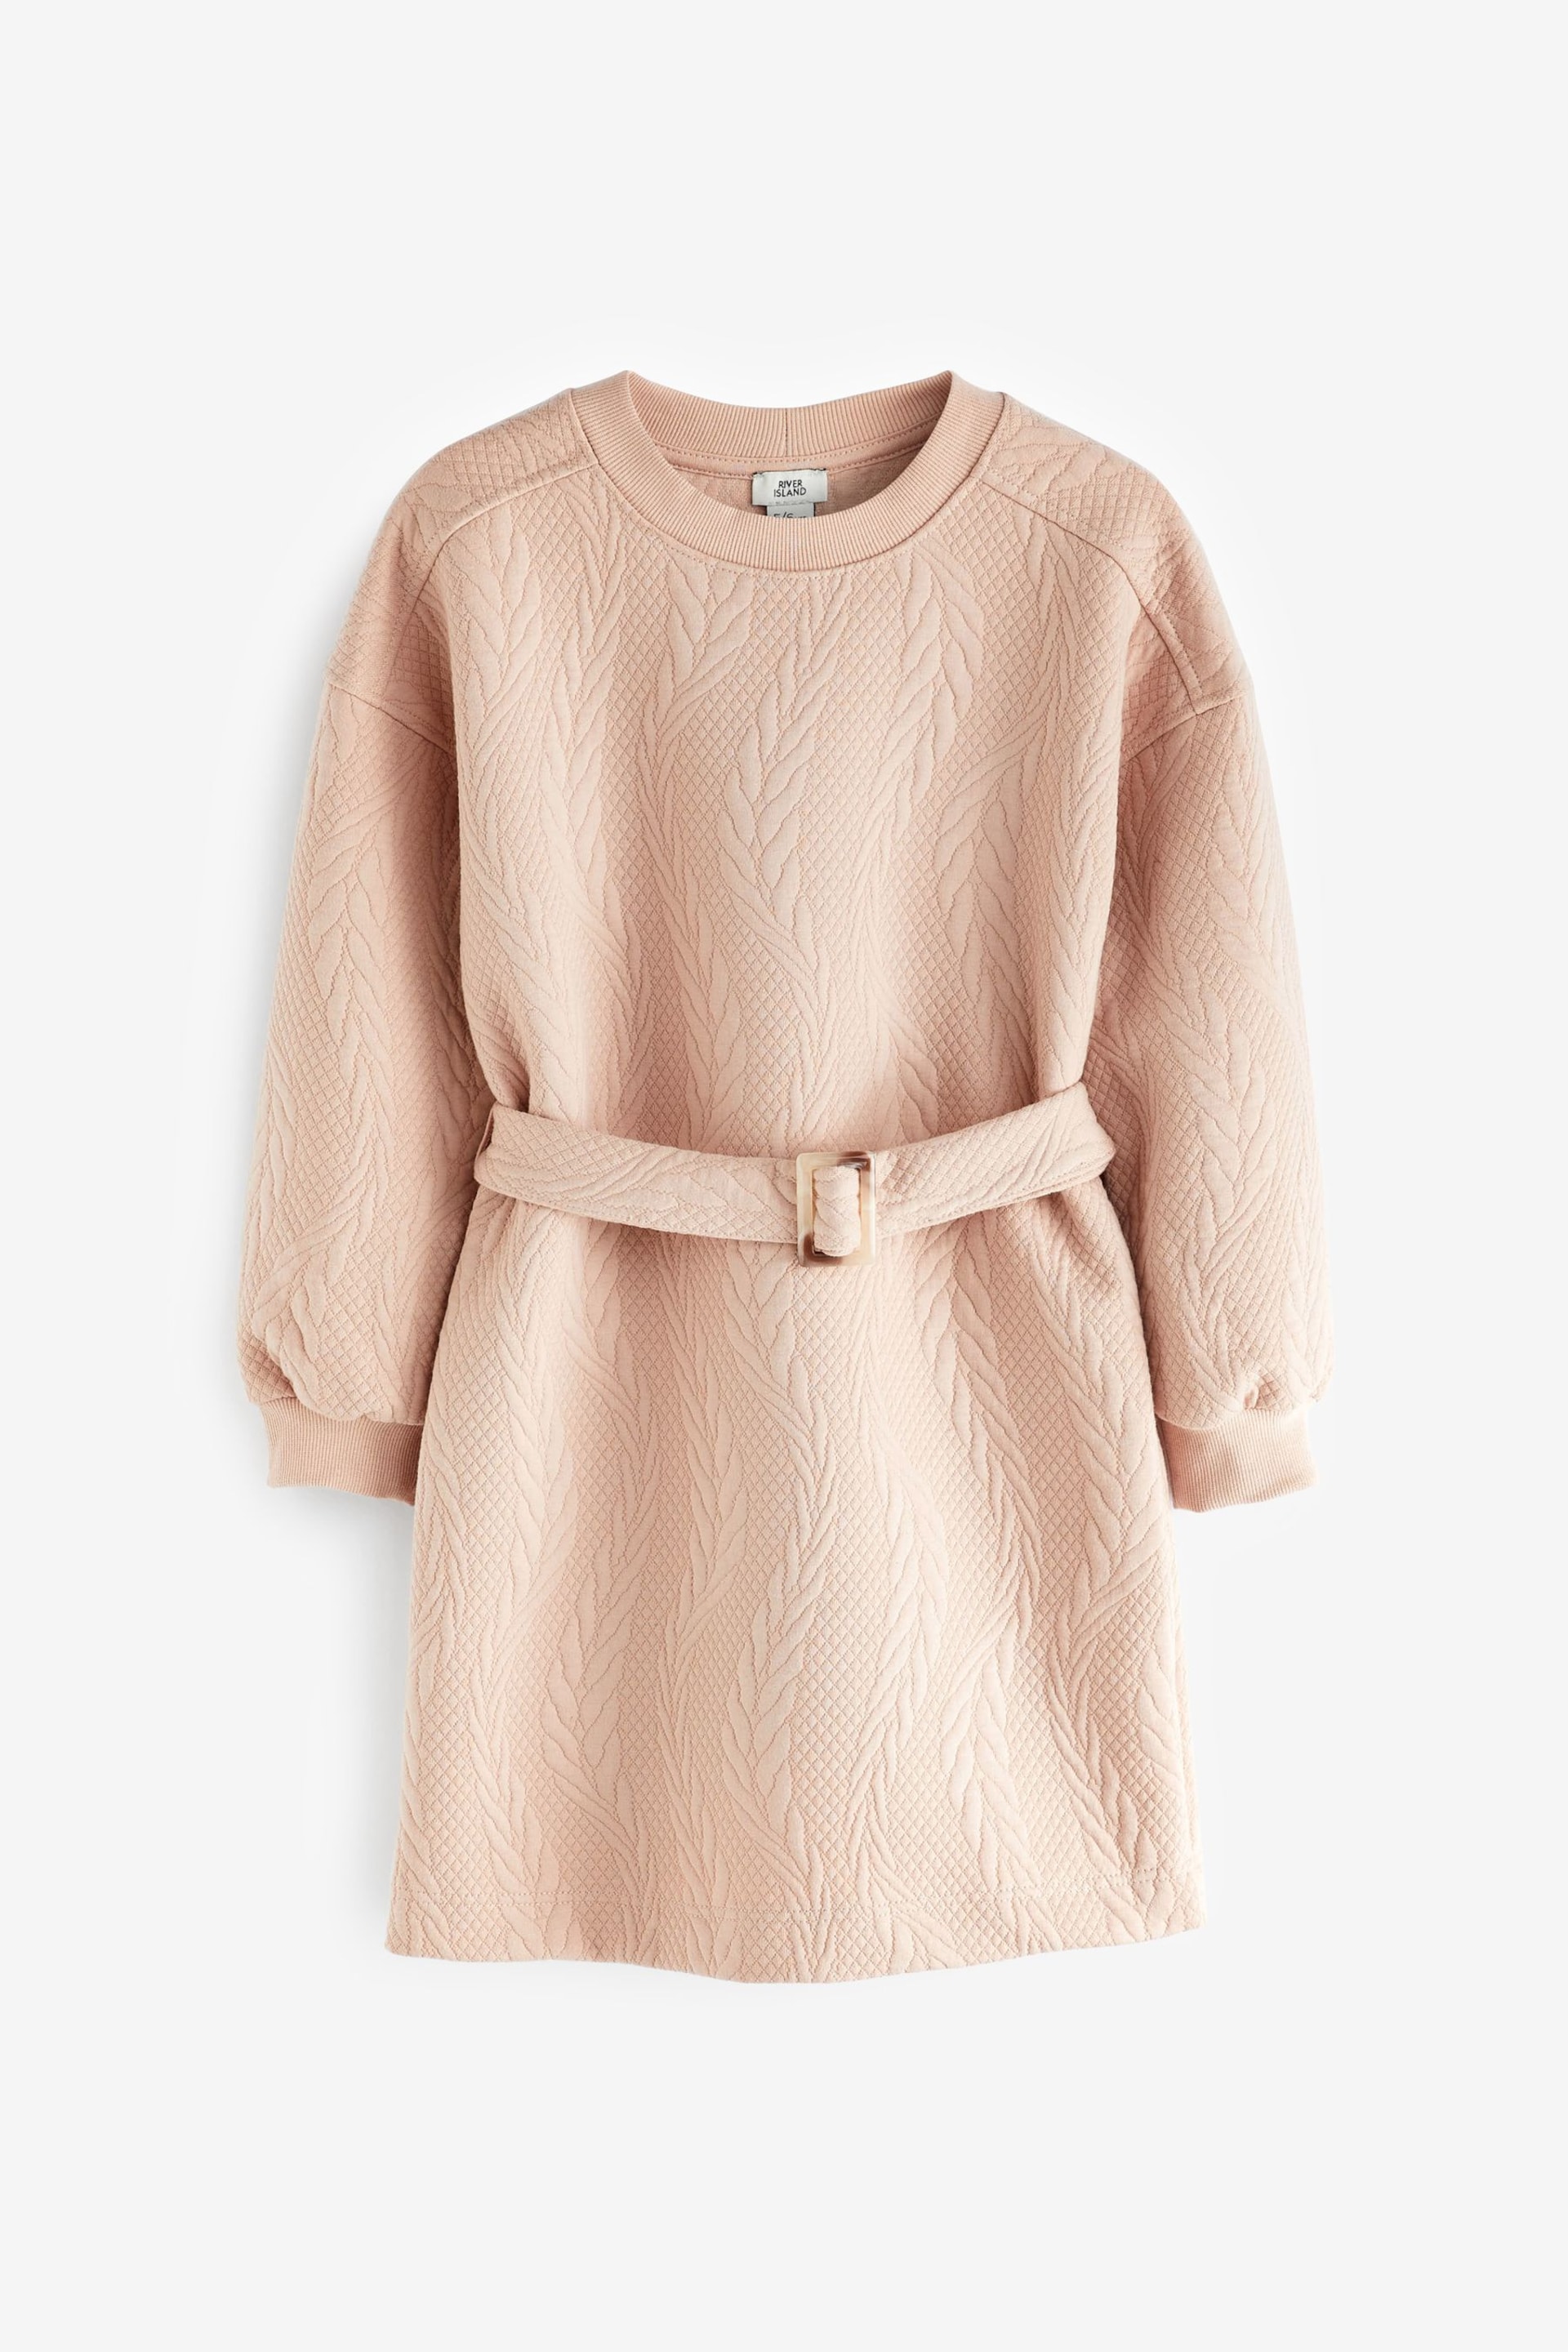 River Island Natural Girls Cable Sweat Dress - Image 1 of 5